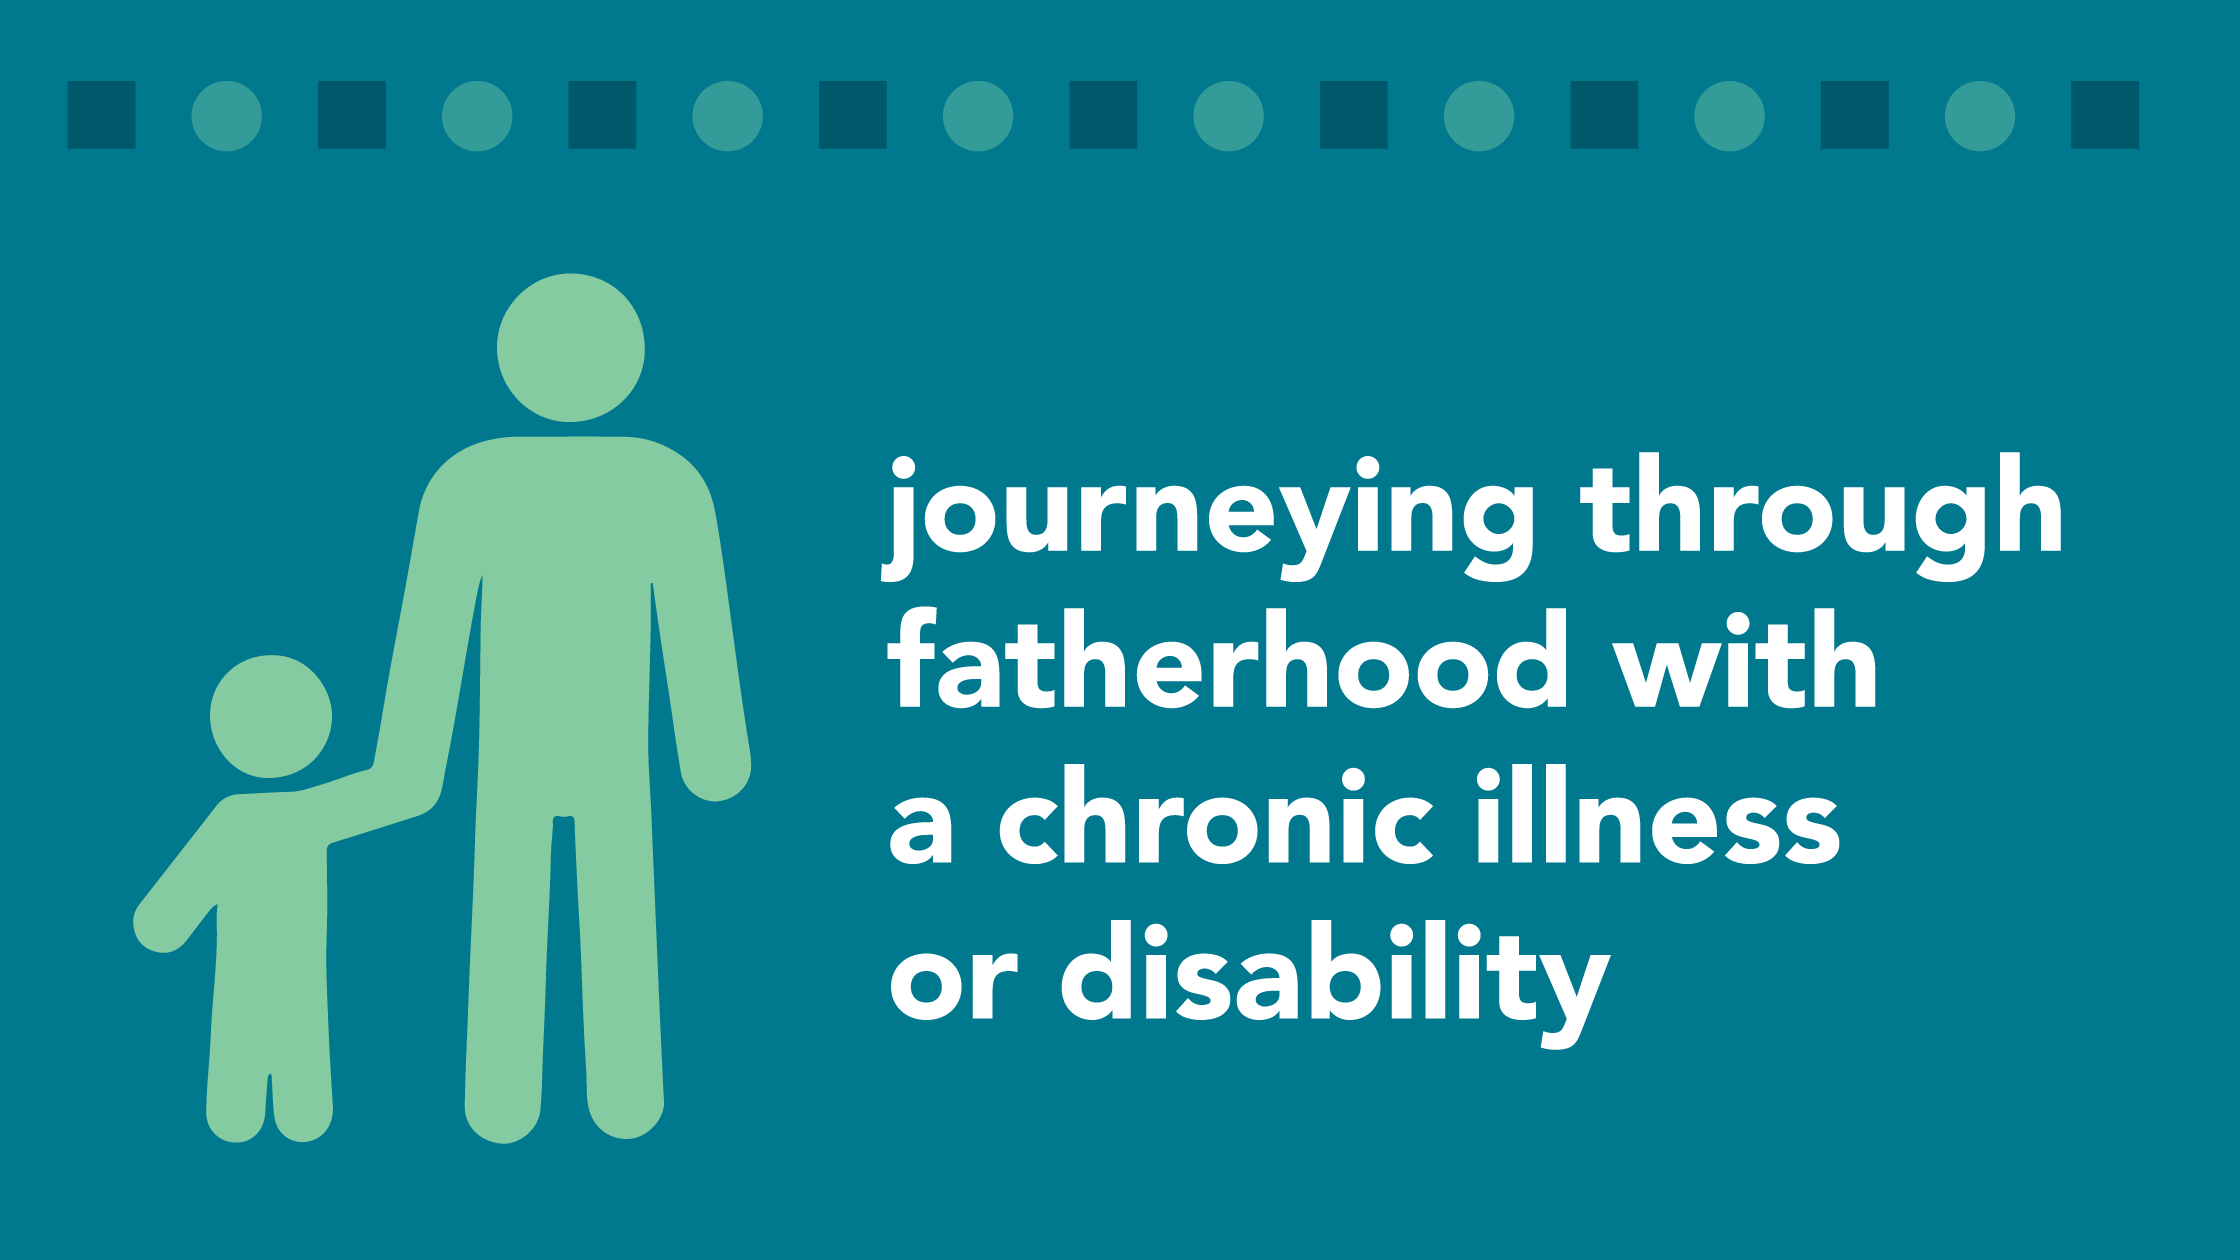 Journeying Through Fatherhood with a Chronic Illness or Disability